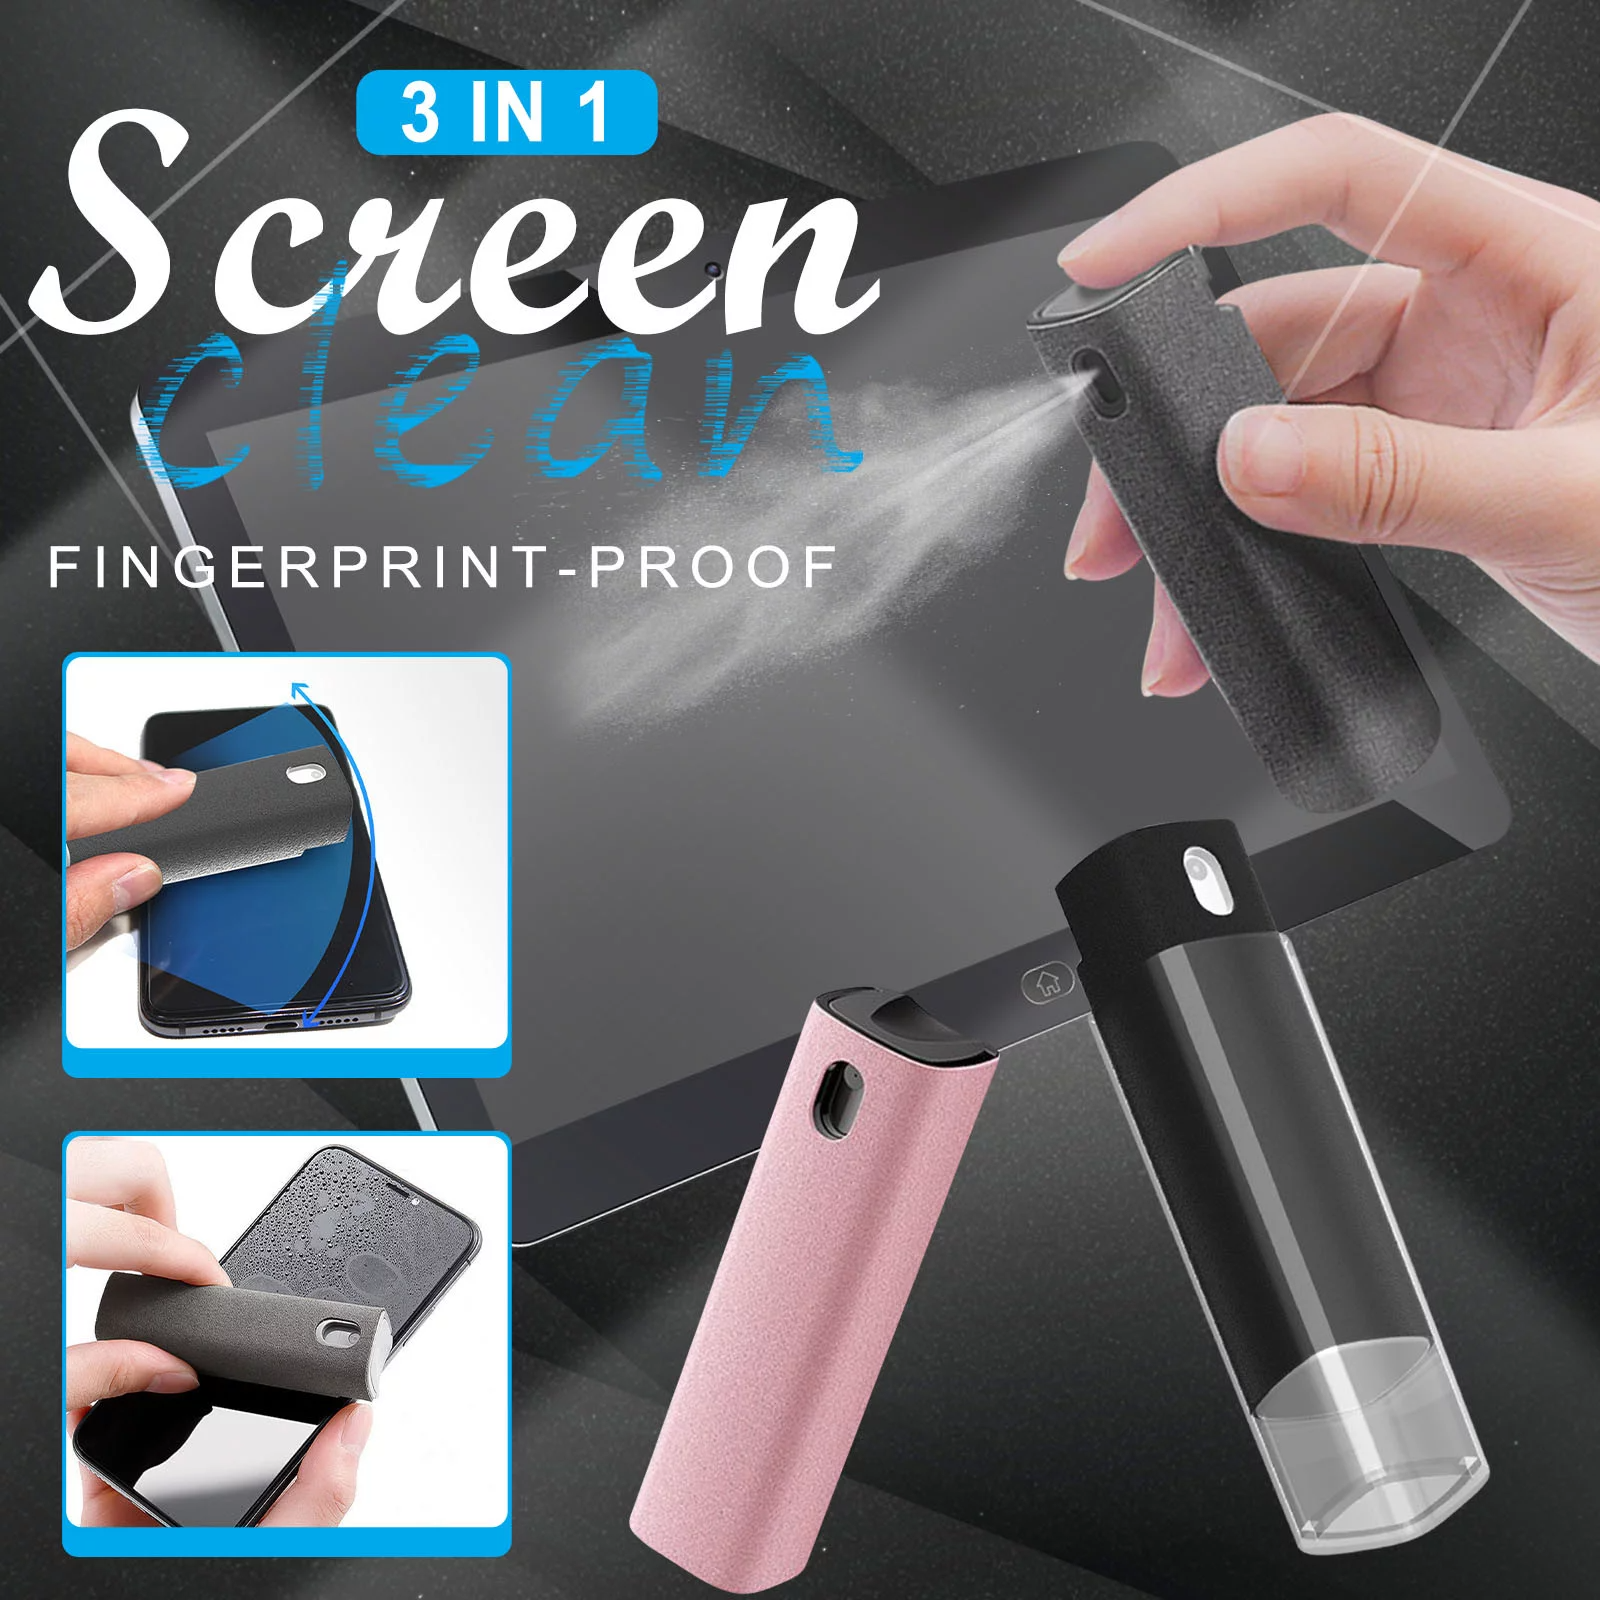 (🎄Early Christmas Sale-49% OFF) 3 In 1 Screen Cleaner Spray - Buy 2 Get 1 Free Now!